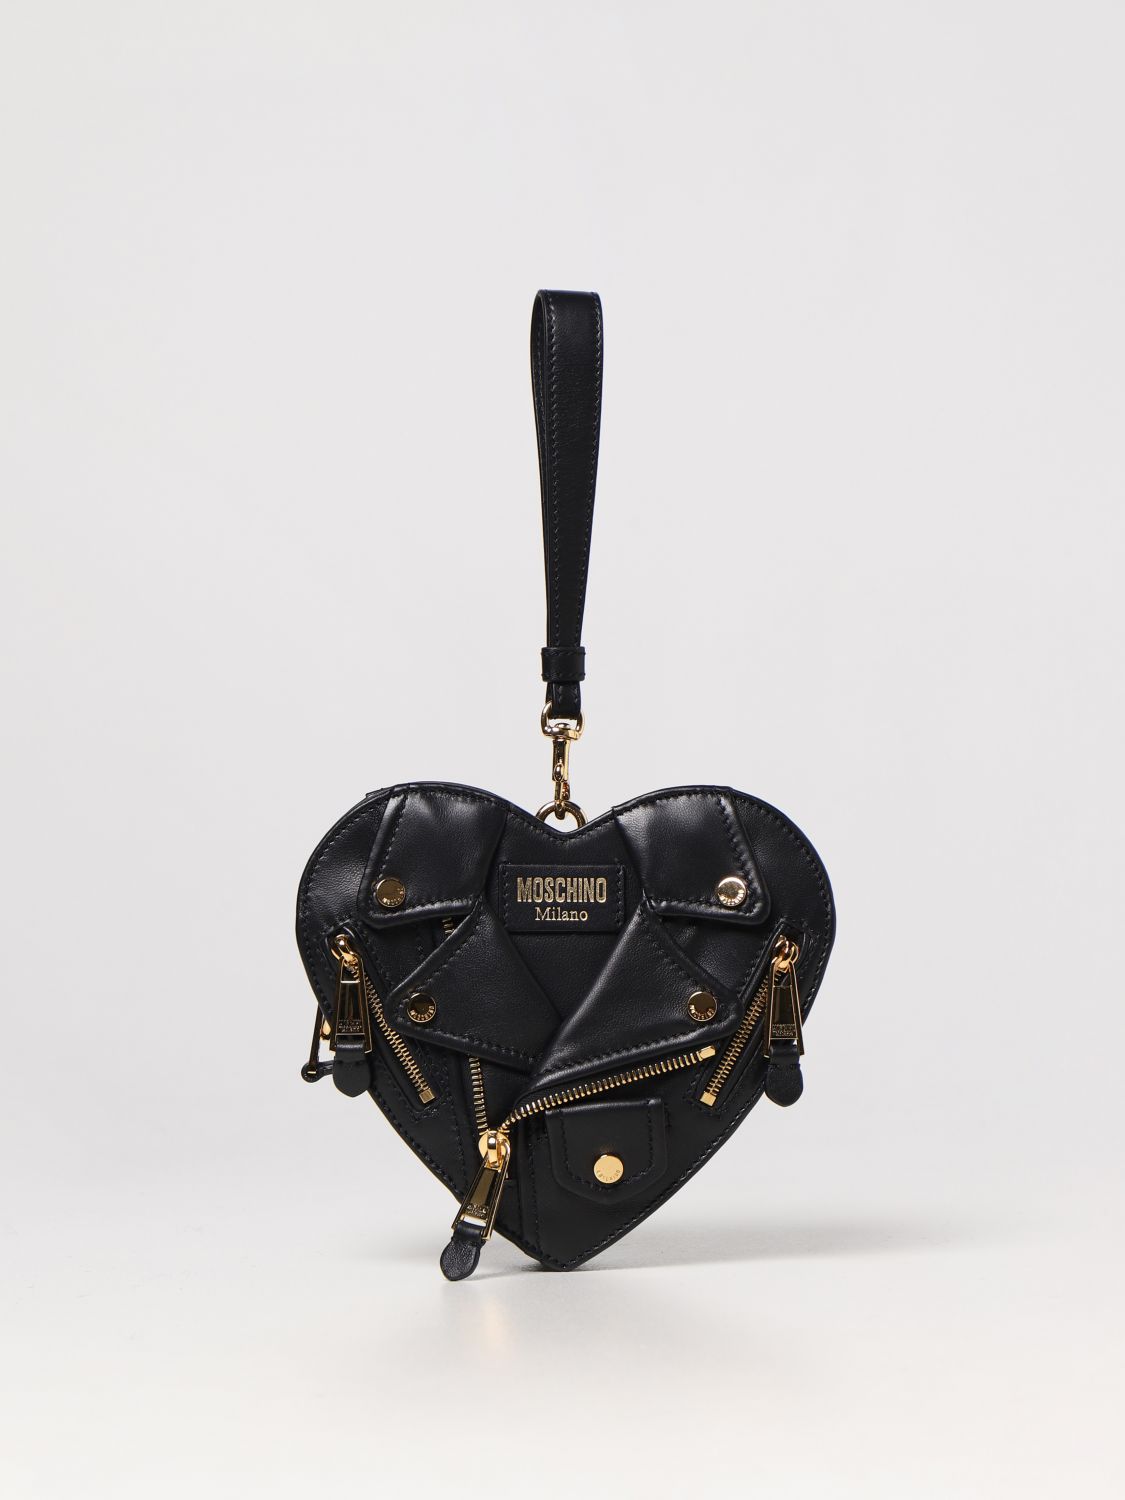 MOSCHINO COUTURE: Heart Biker leather bag - Black | Moschino Couture ...